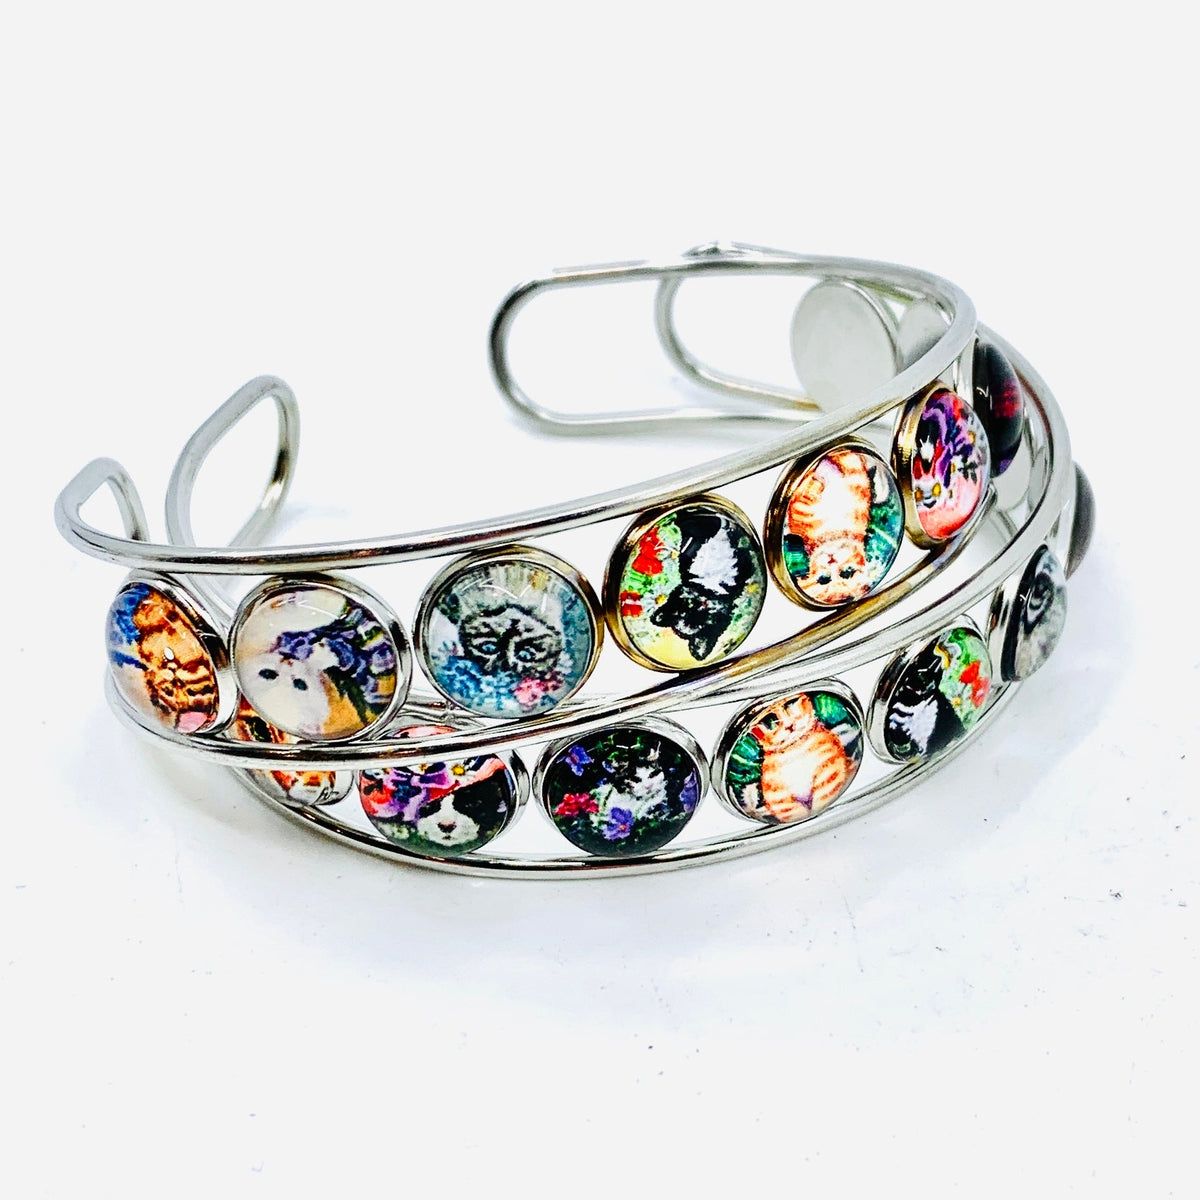 Artistic Cuff Bracelet Jewelry - Cats and Kittens 